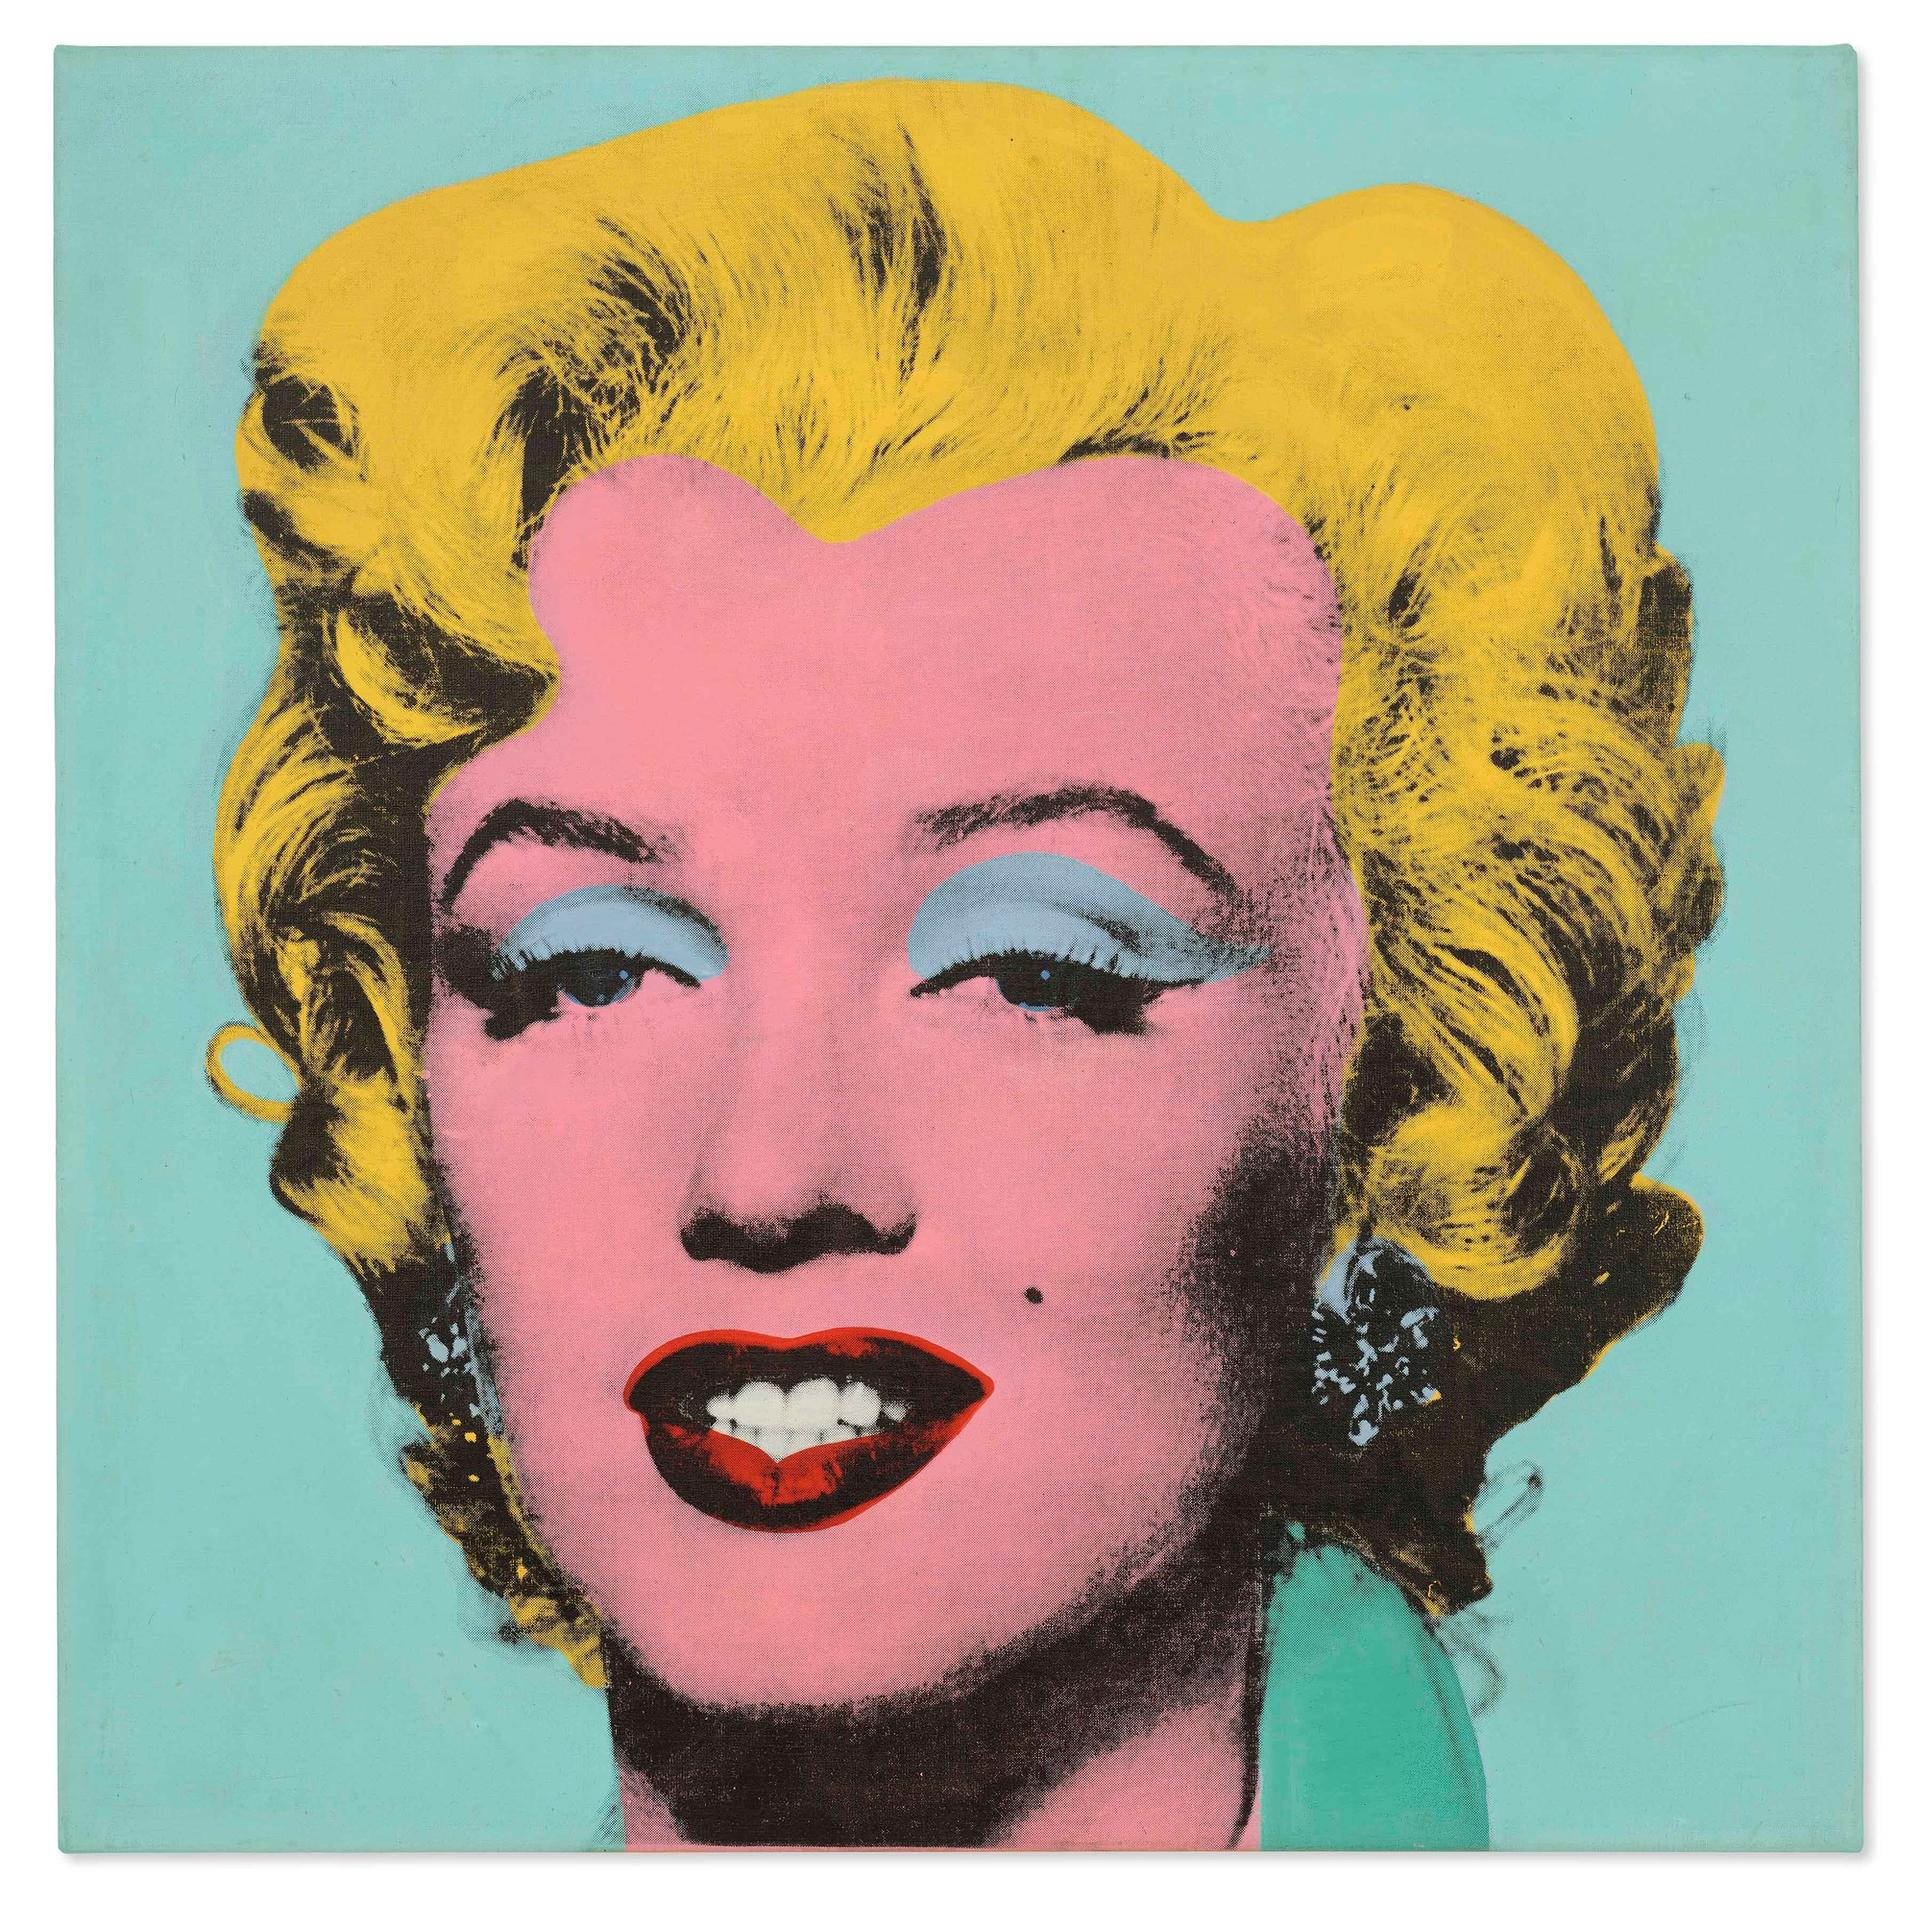 Shot Sage Blue Marilyn (1964) by Andy Warhol

Courtesy of Christie's